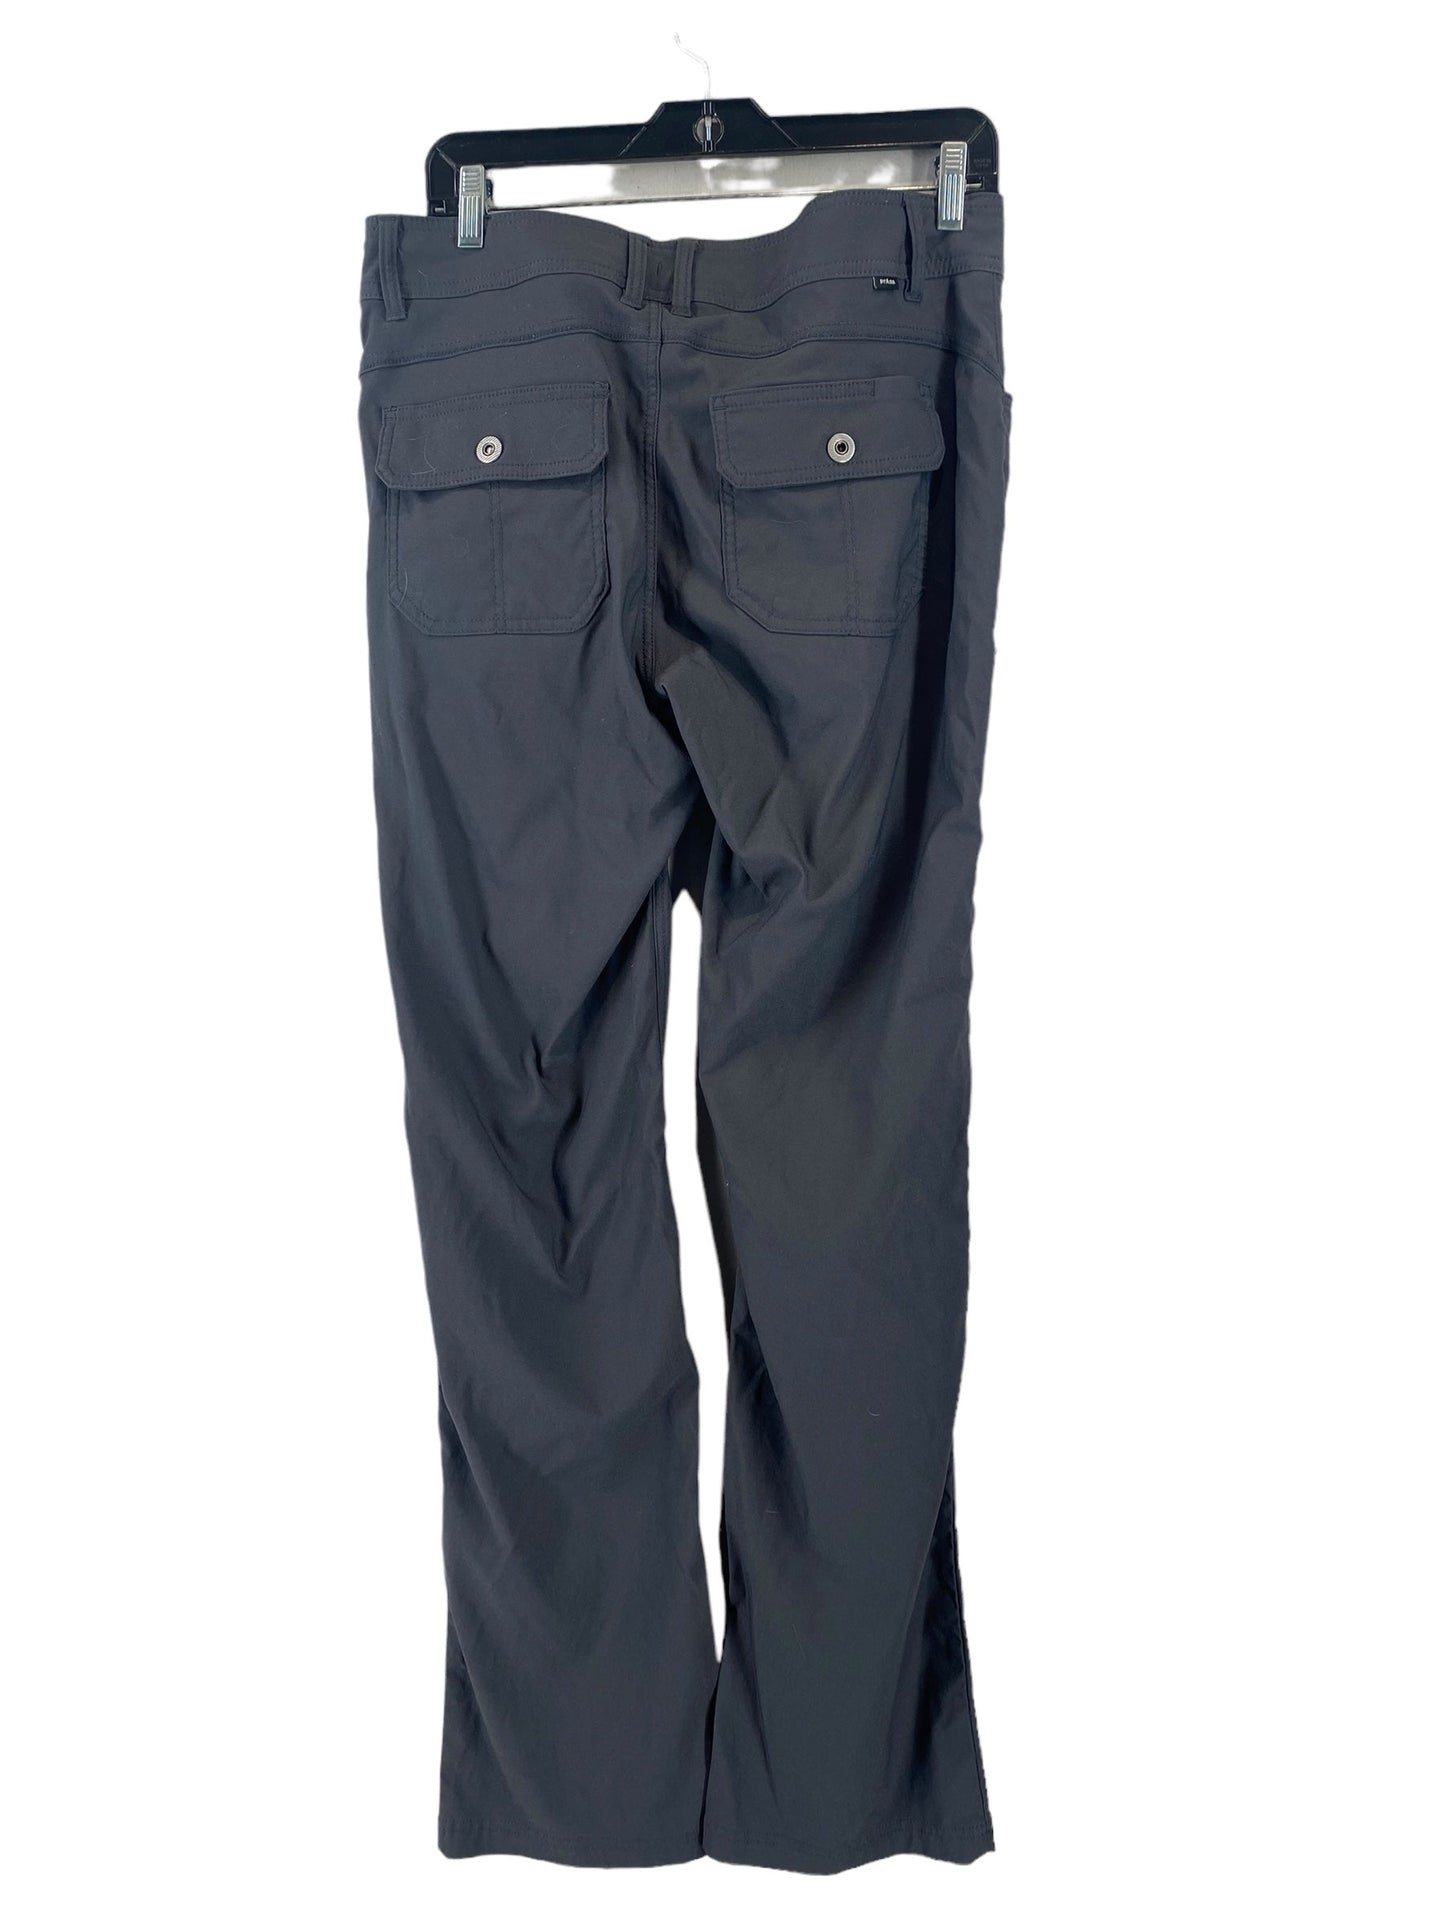 Athletic Pants By Prana  Size: 10tall